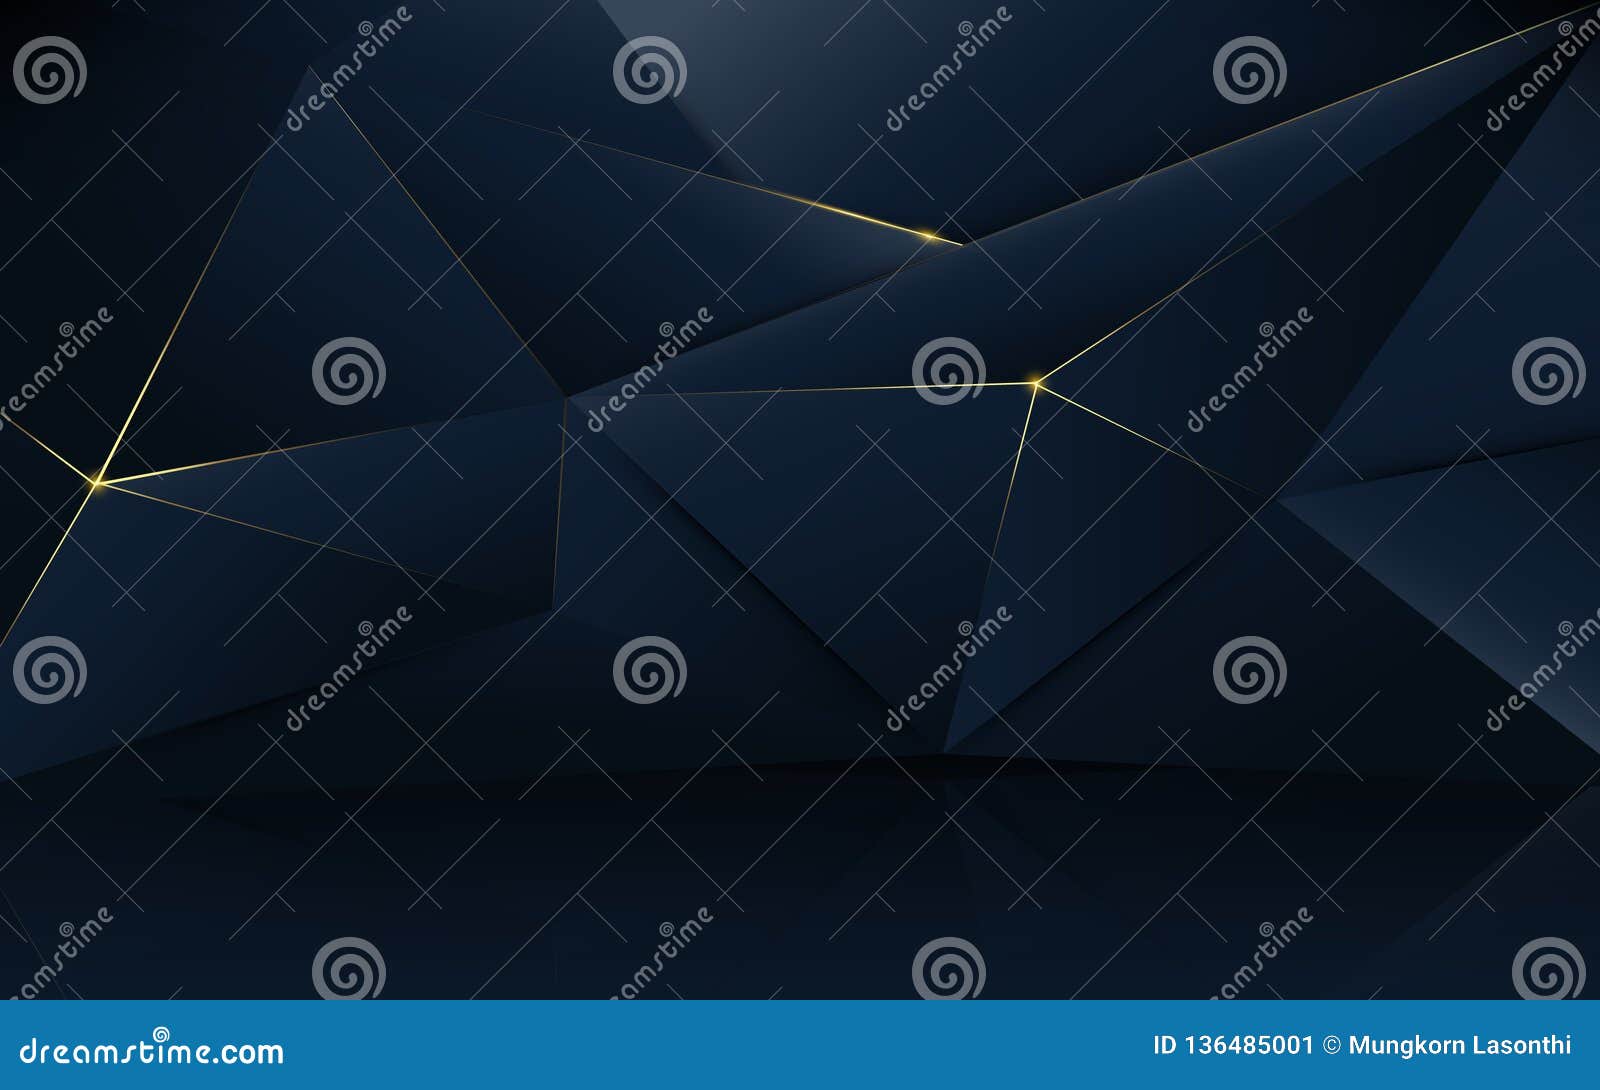 abstract polygonal pattern luxury dark blue with gold